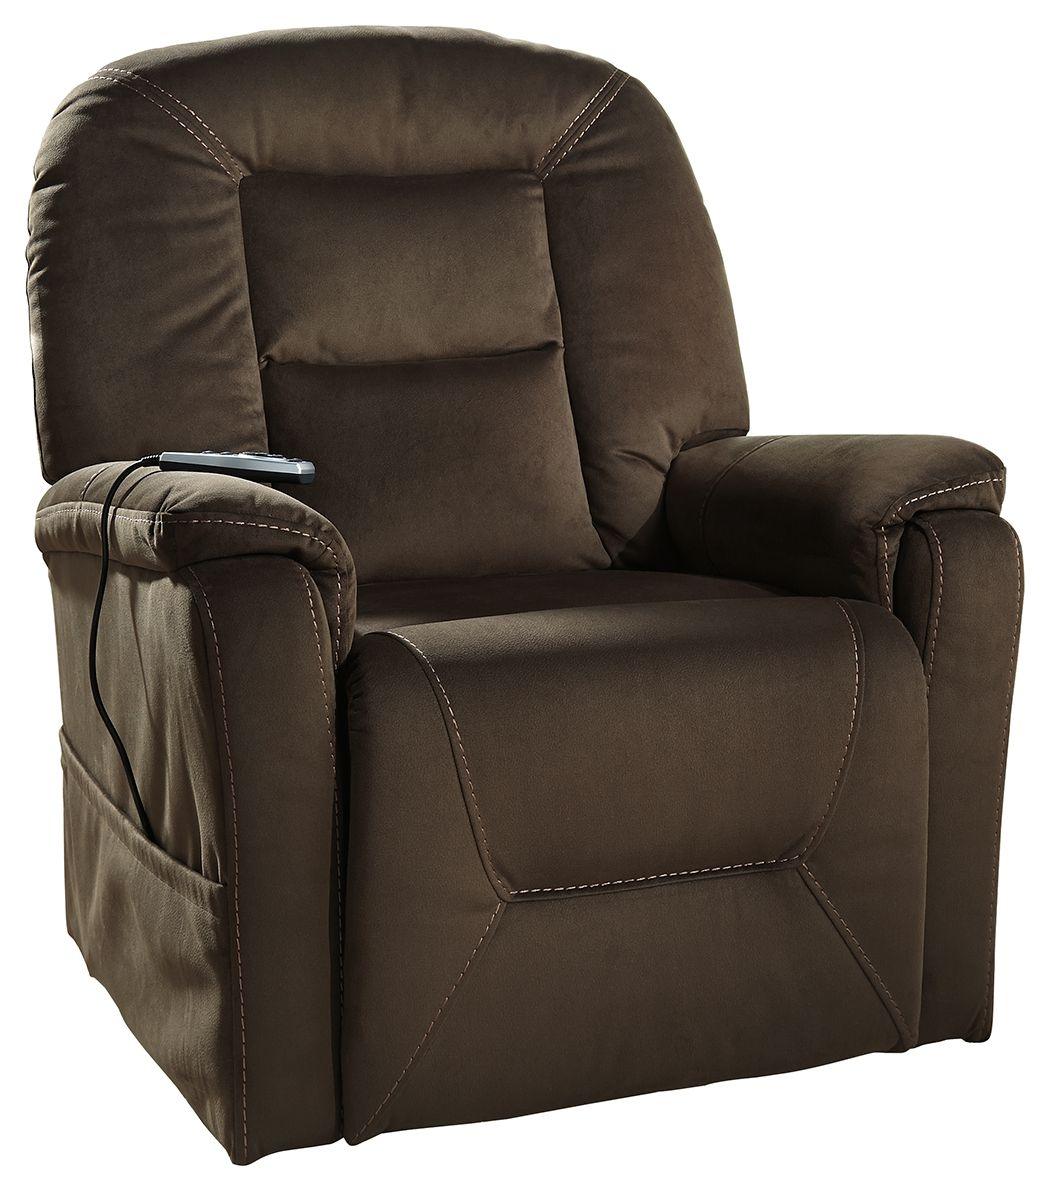 Samir - Coffee - Power Lift Recliner Tony's Home Furnishings Furniture. Beds. Dressers. Sofas.